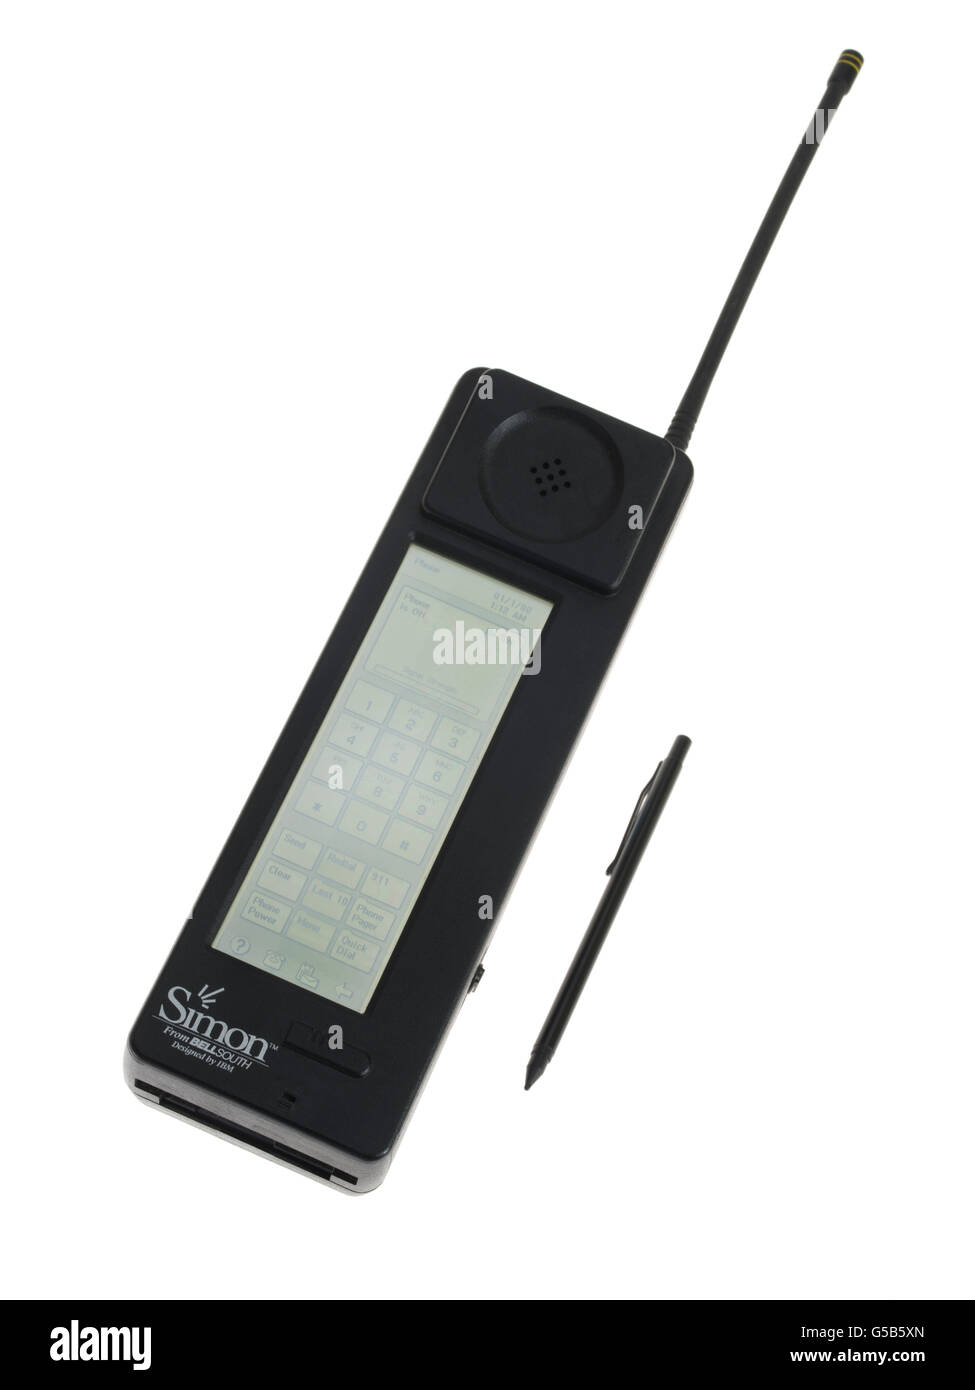 IBM Simon Personal Communicator  1st smart phone, designed by IBM for Bell South released August 16, 1994. PDA & touchscreen Stock Photo